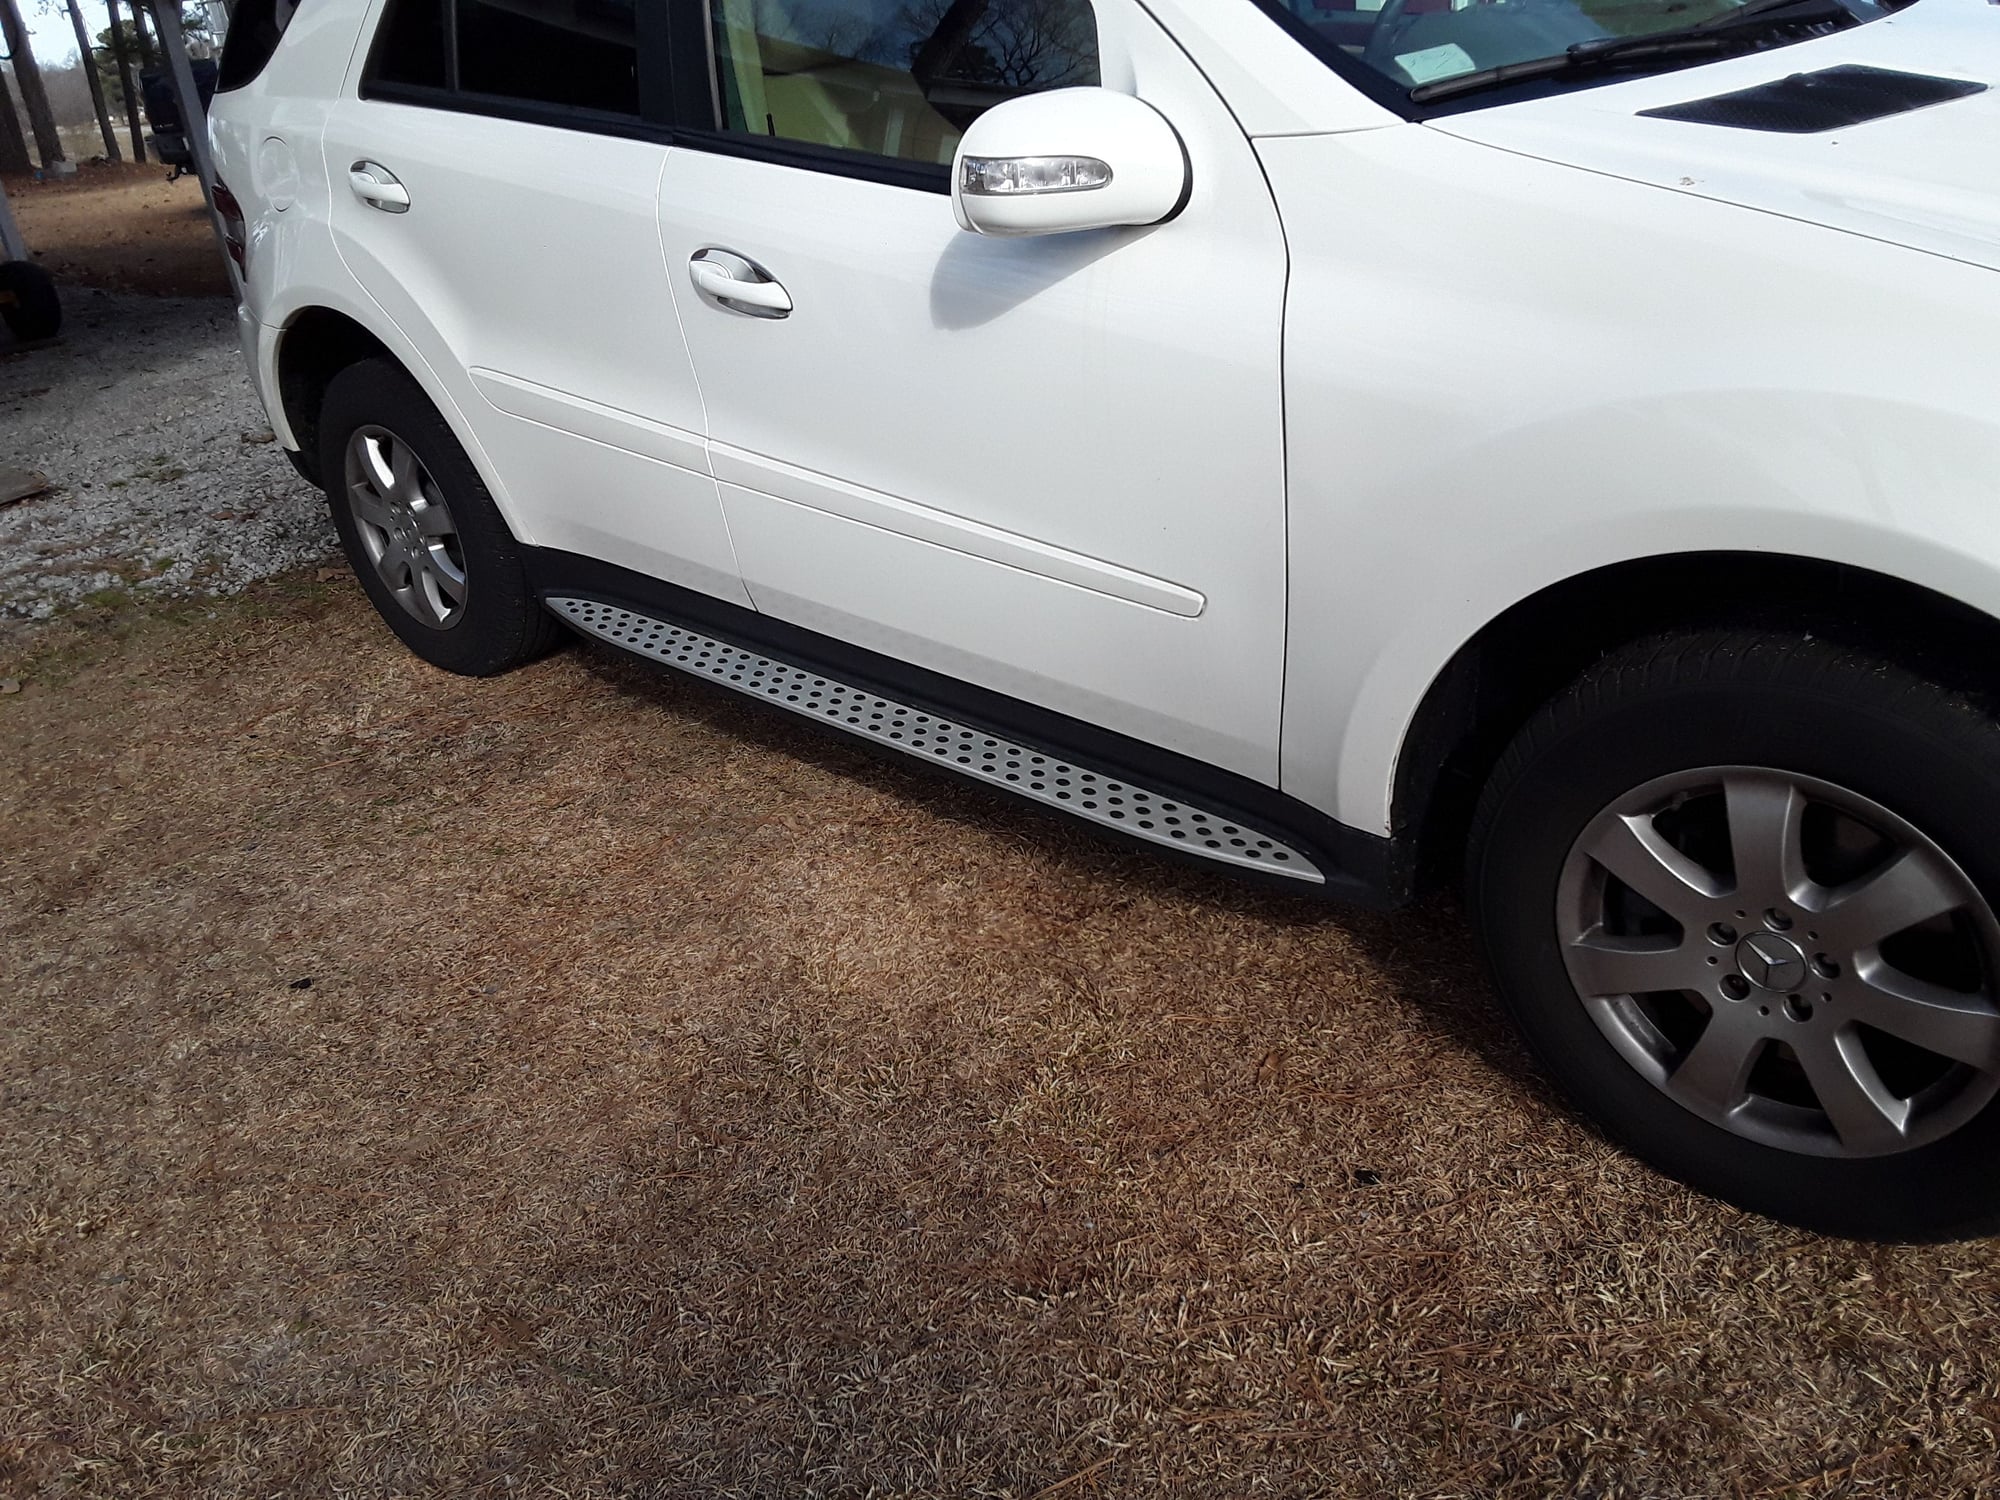 Accessories - Running Boards, oem, 2007 Mercedes ML 350 - Used - 2006 to 2011 Mercedes-Benz ML350 - Angier, NC 27501, United States